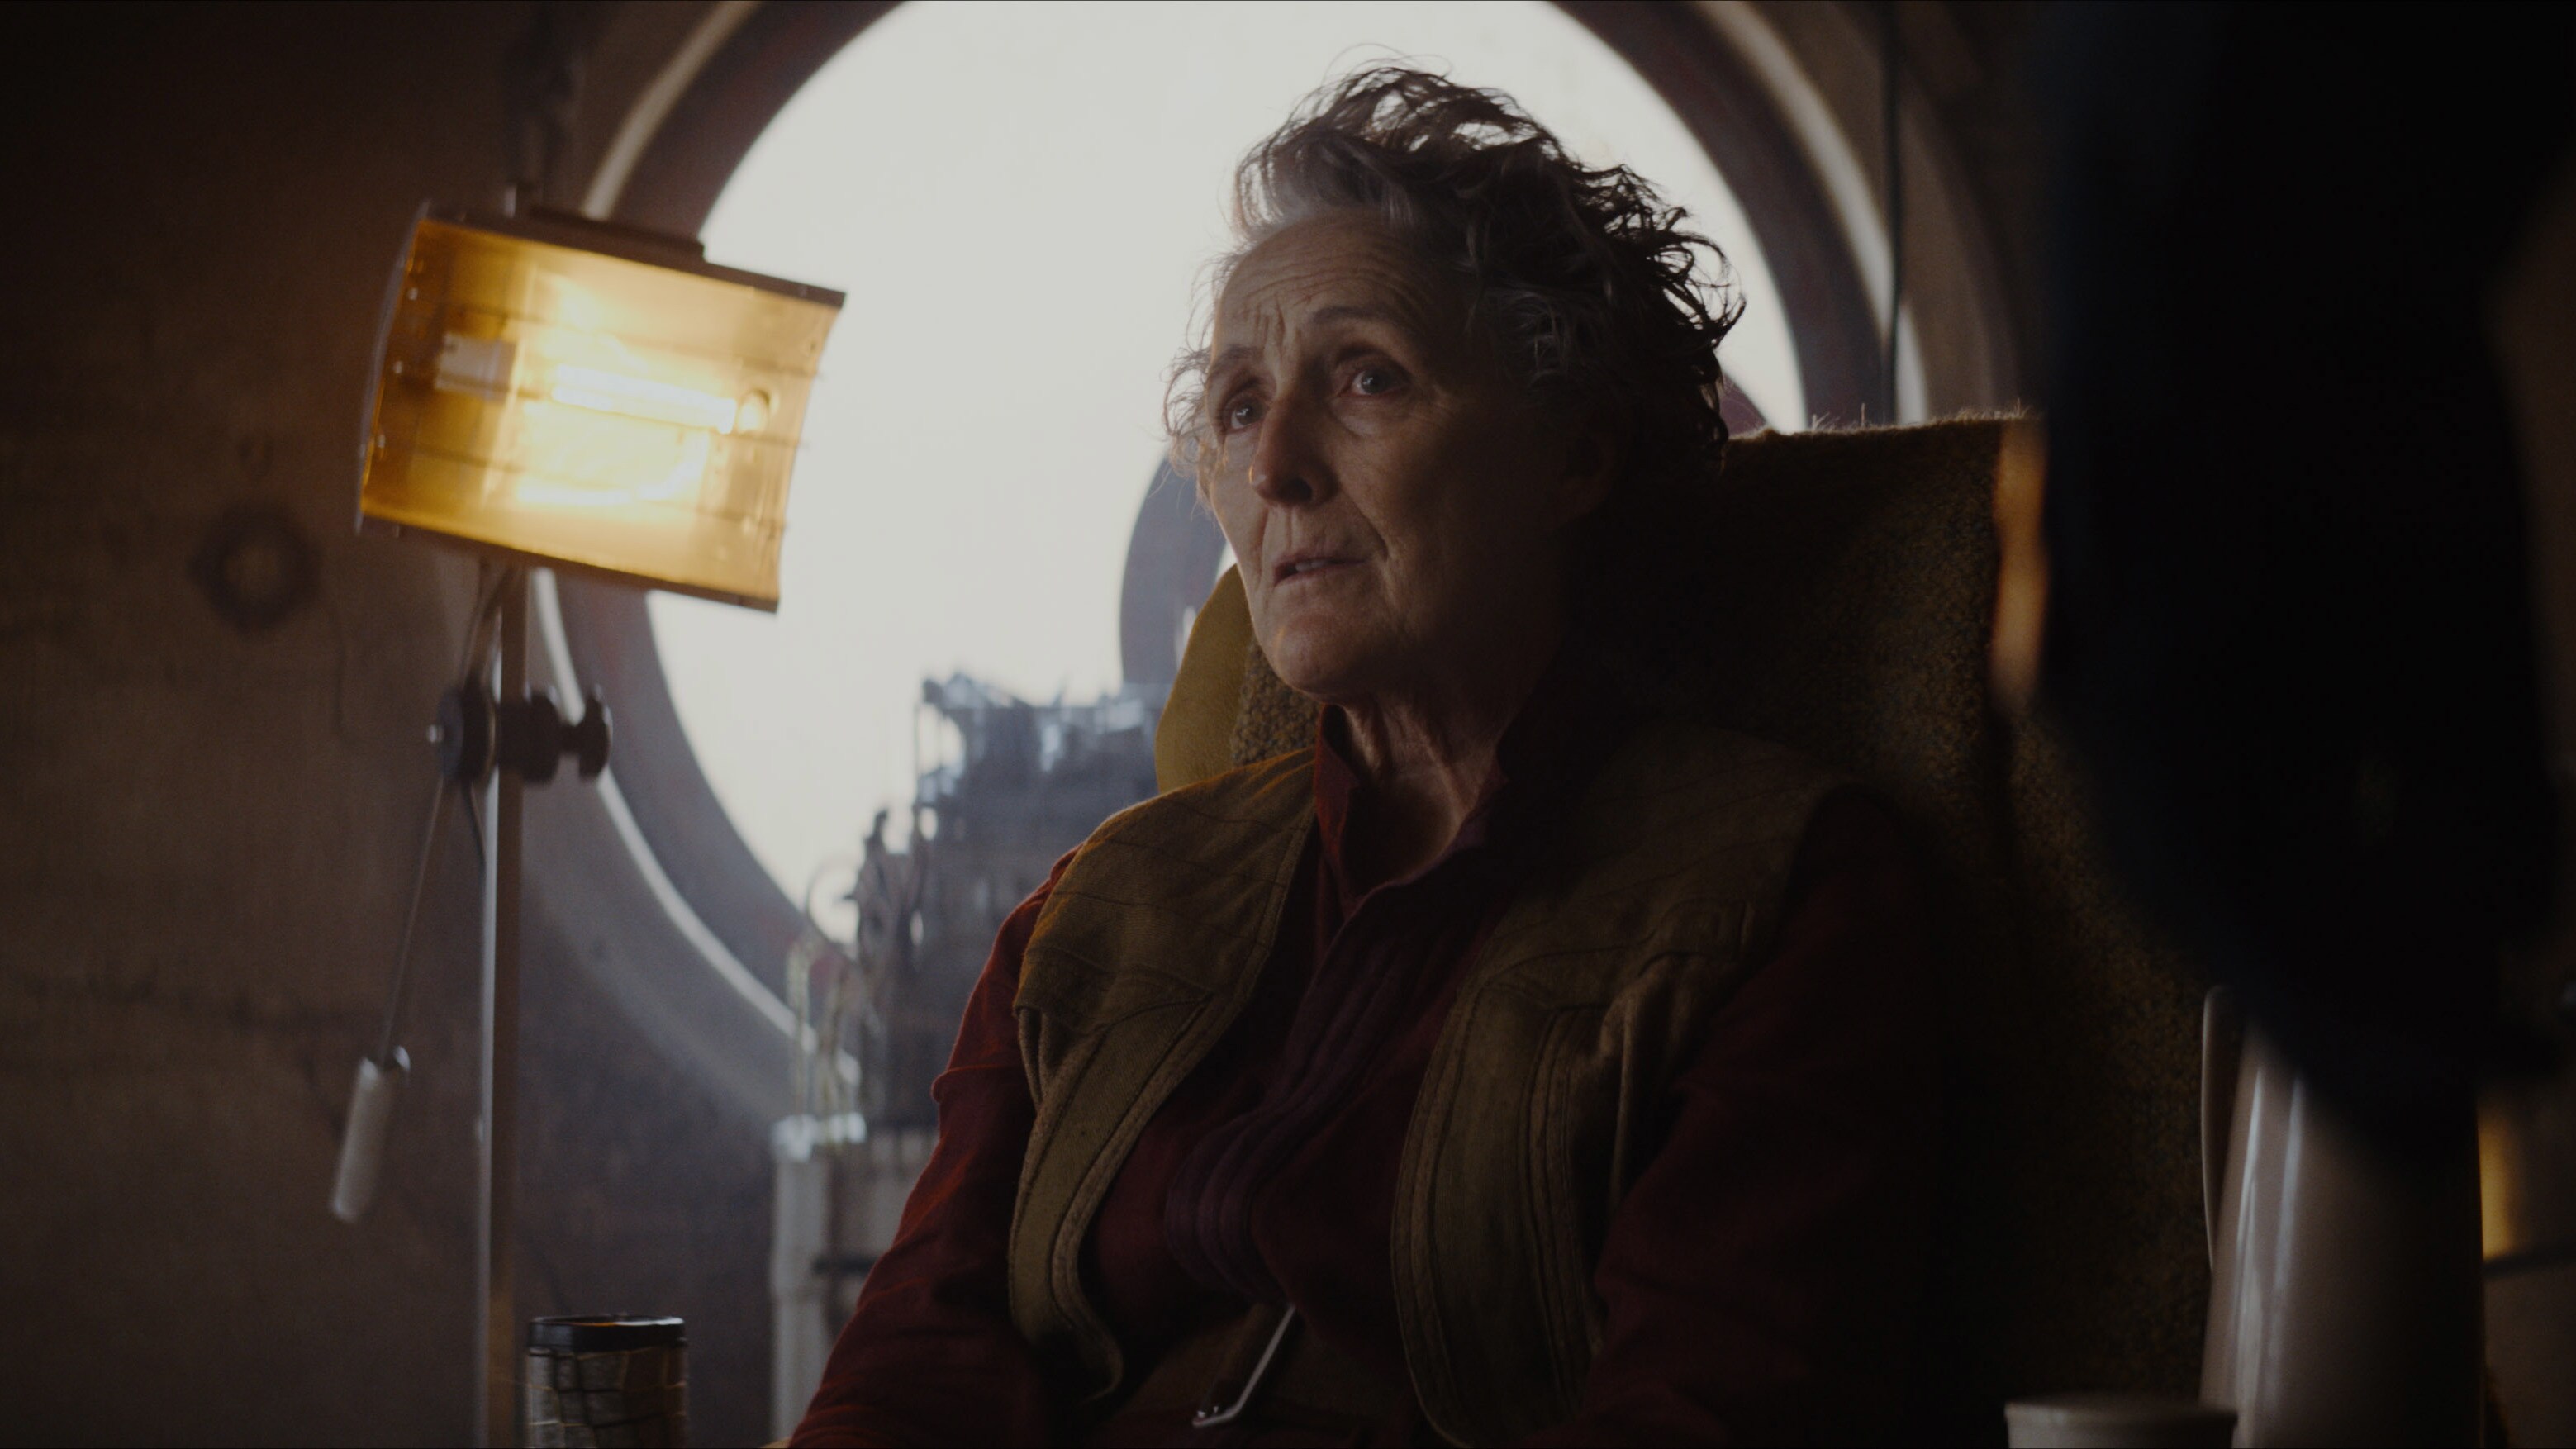 Maarva (Fiona Shaw) in Lucasfilm's ANDOR, exclusively on Disney+. ©2022 Lucasfilm Ltd. & TM. All Rights Reserved.